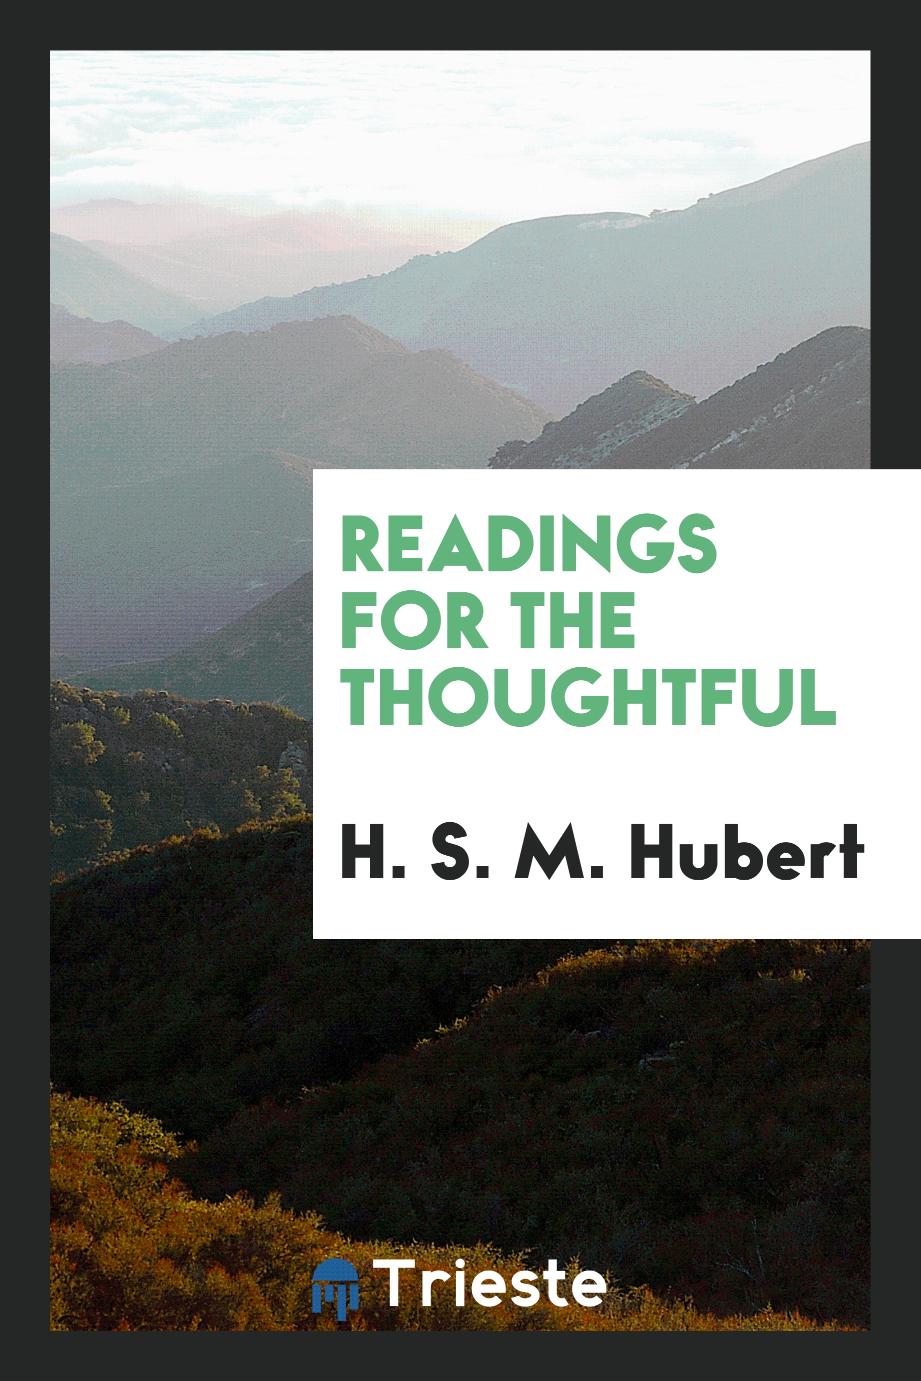 Readings for the thoughtful